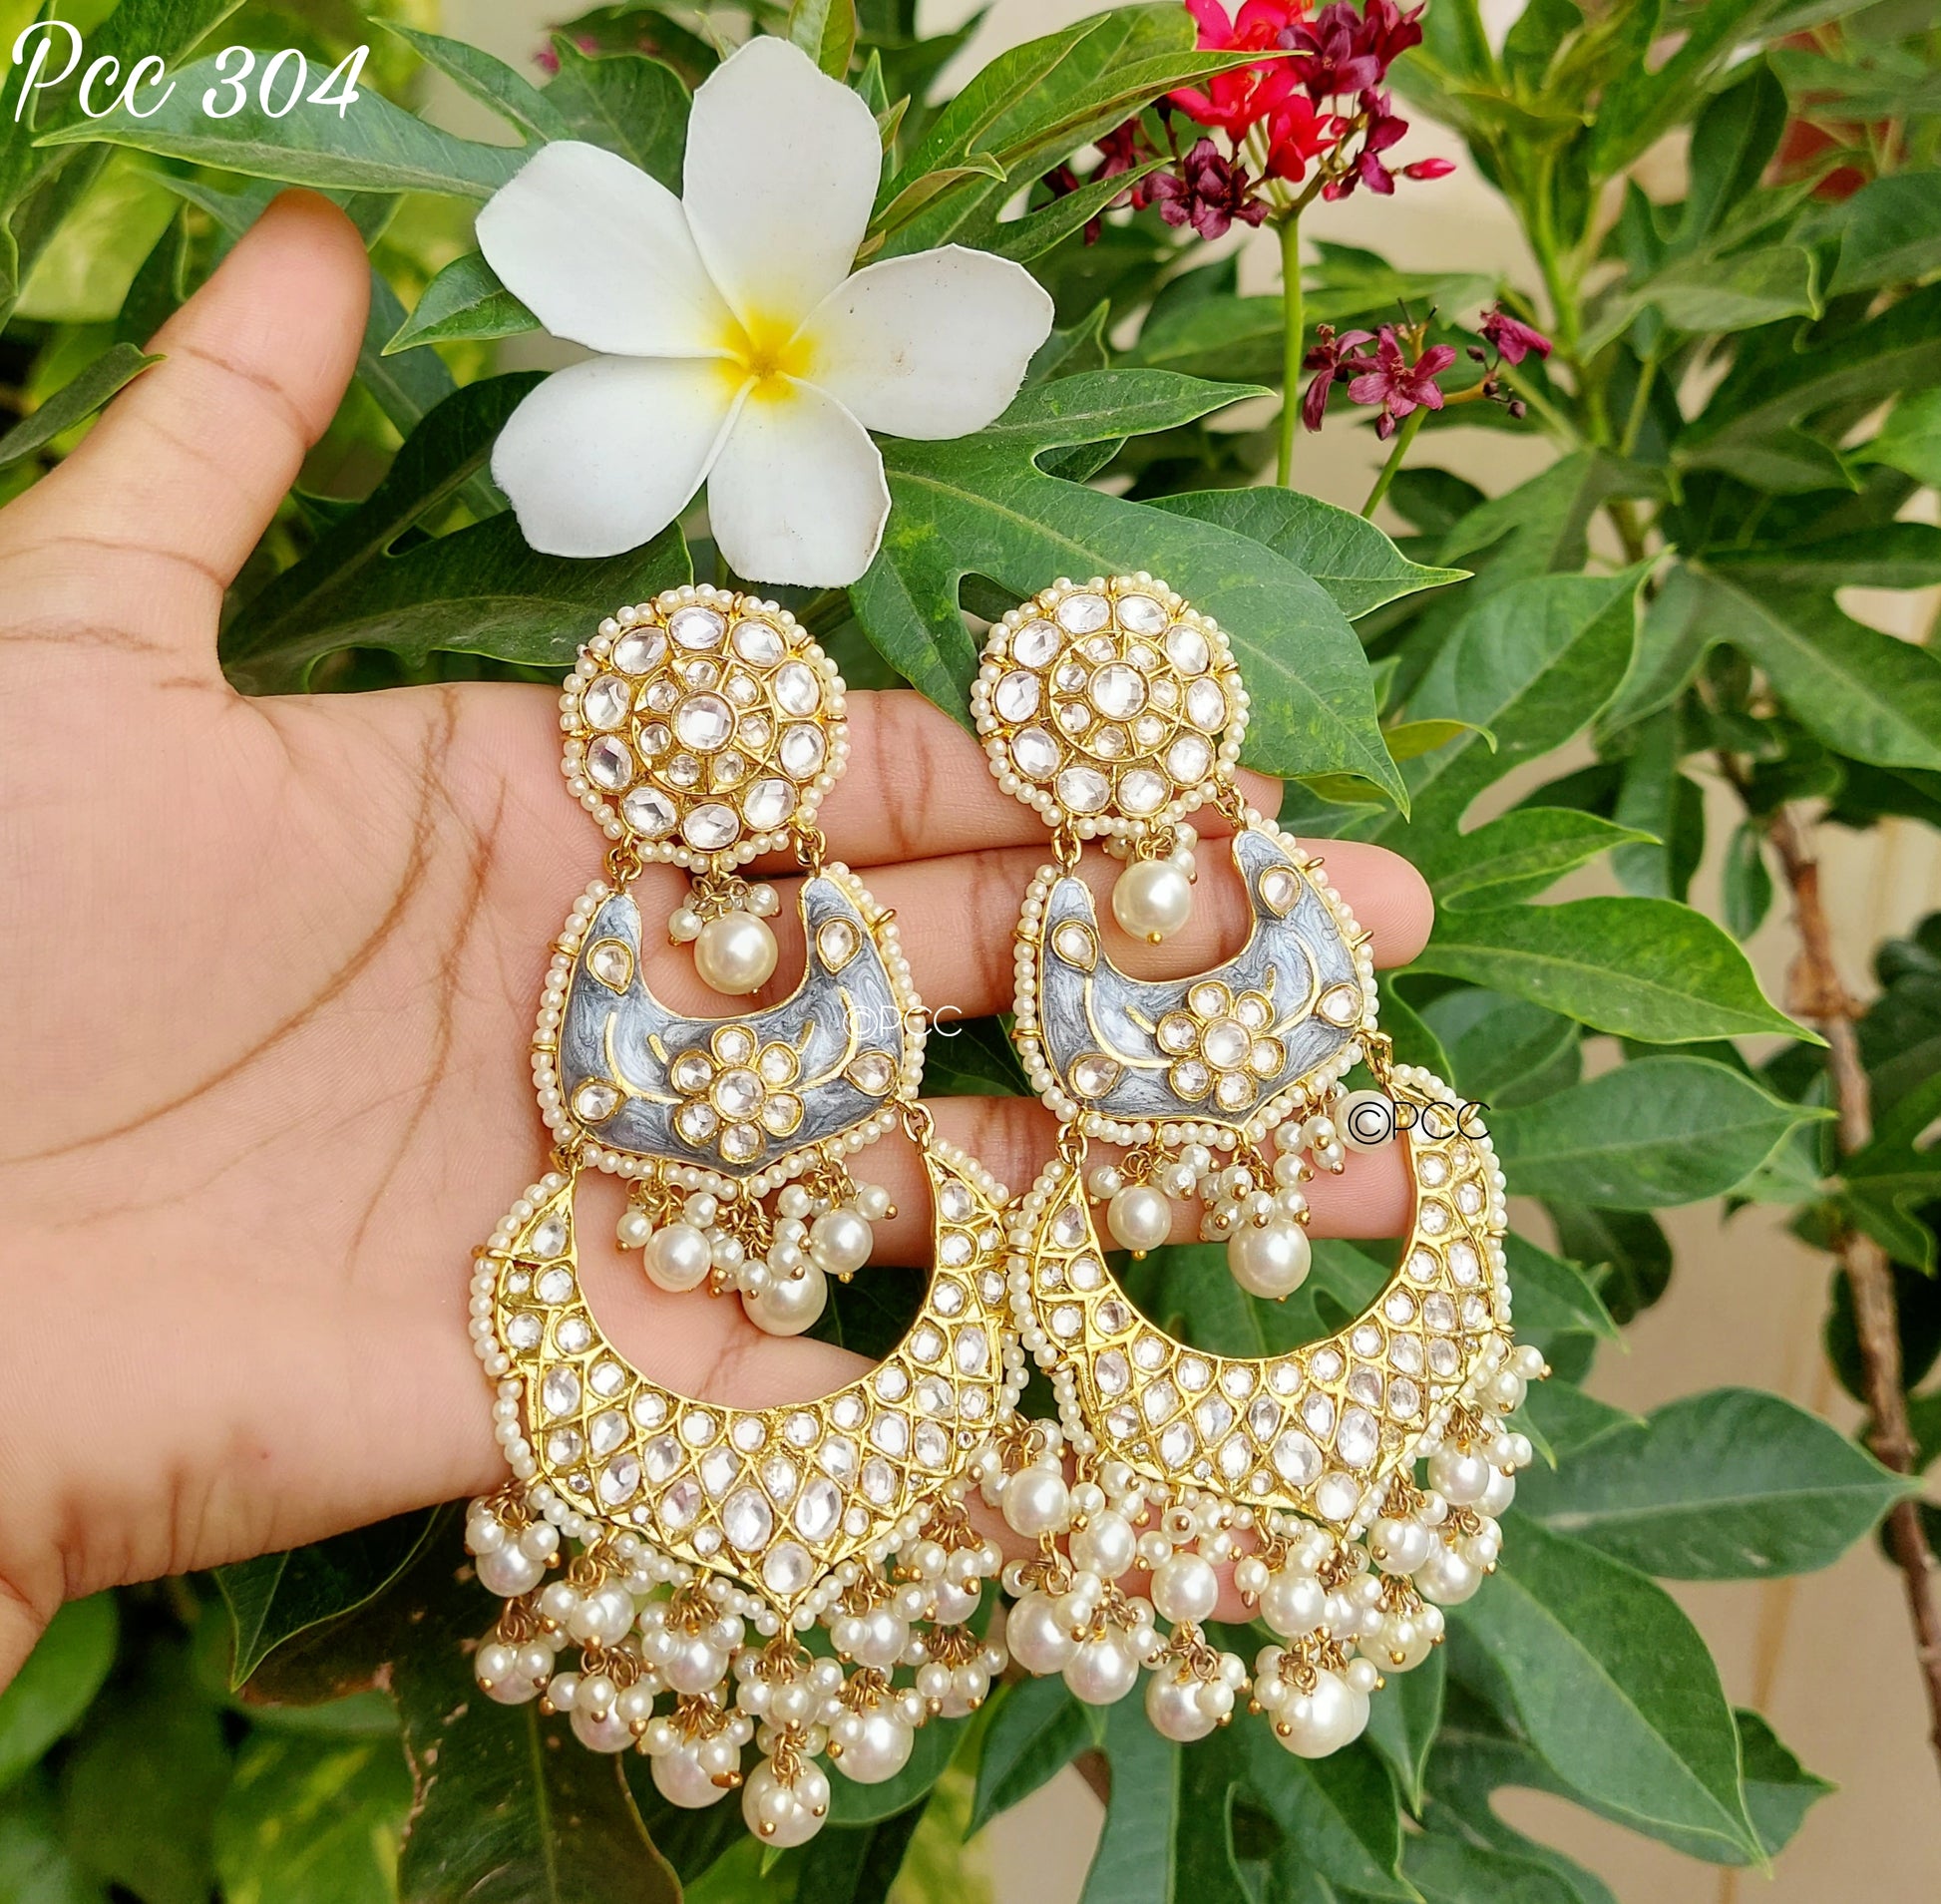 ArtistryC - Order # NEW DESIGNS New Sabyasachi Earring SET Artificial  Jewellery SHRI Online on @Rs755 Whatsapp on 9619659727 ArtistryC.in Order #NEW  Design New Sabyasachi Earring SET Artificial Jewellery SHRI Online on